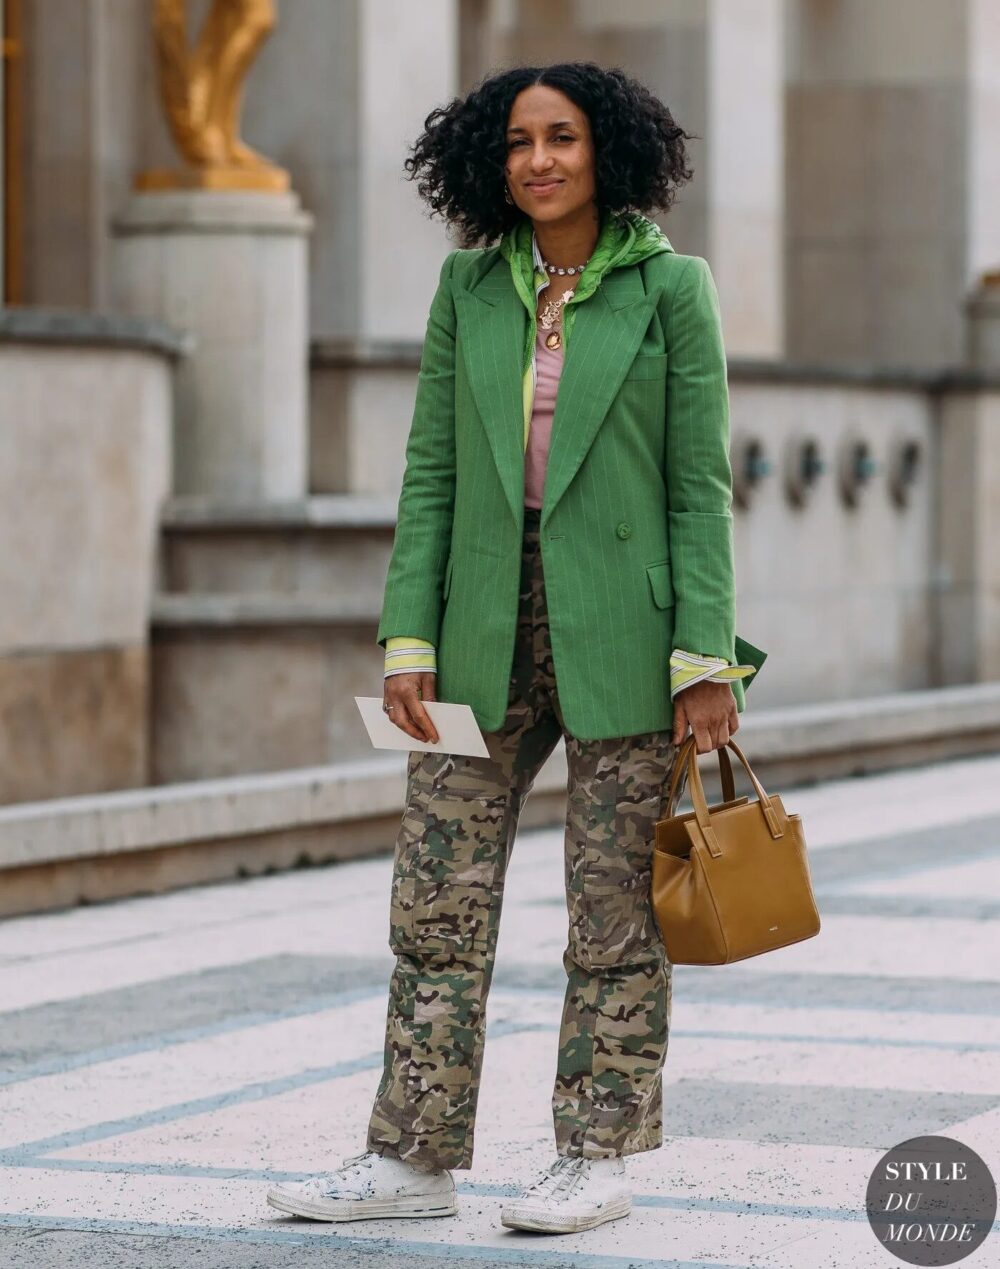 Women whose style we admire: Chioma Nnadi (the new head of British Vogue)